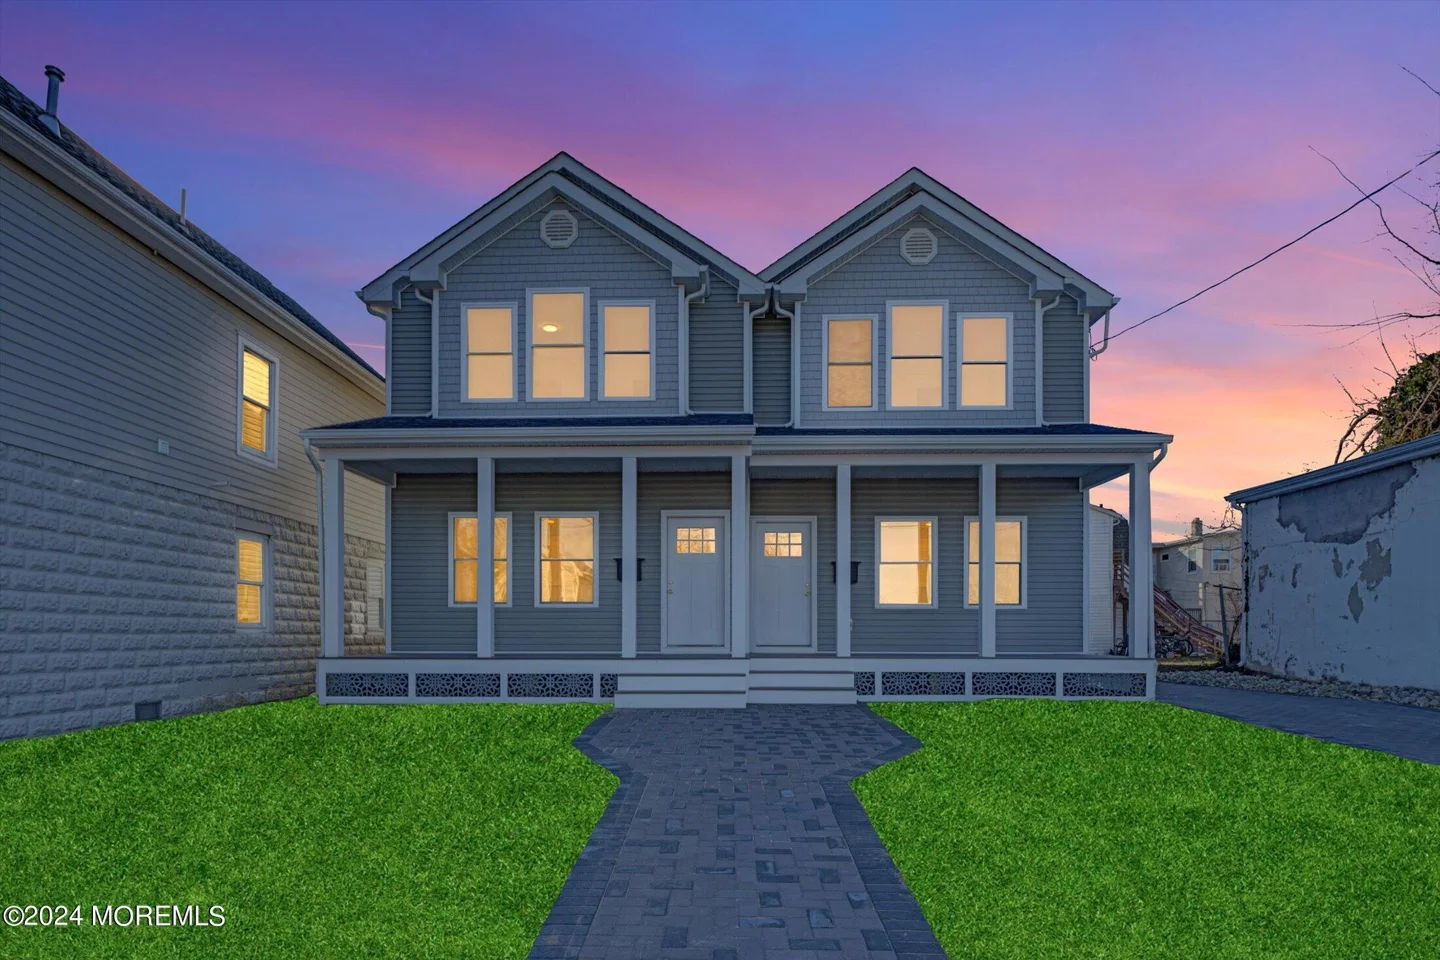 New Two family home in Asbury Park!